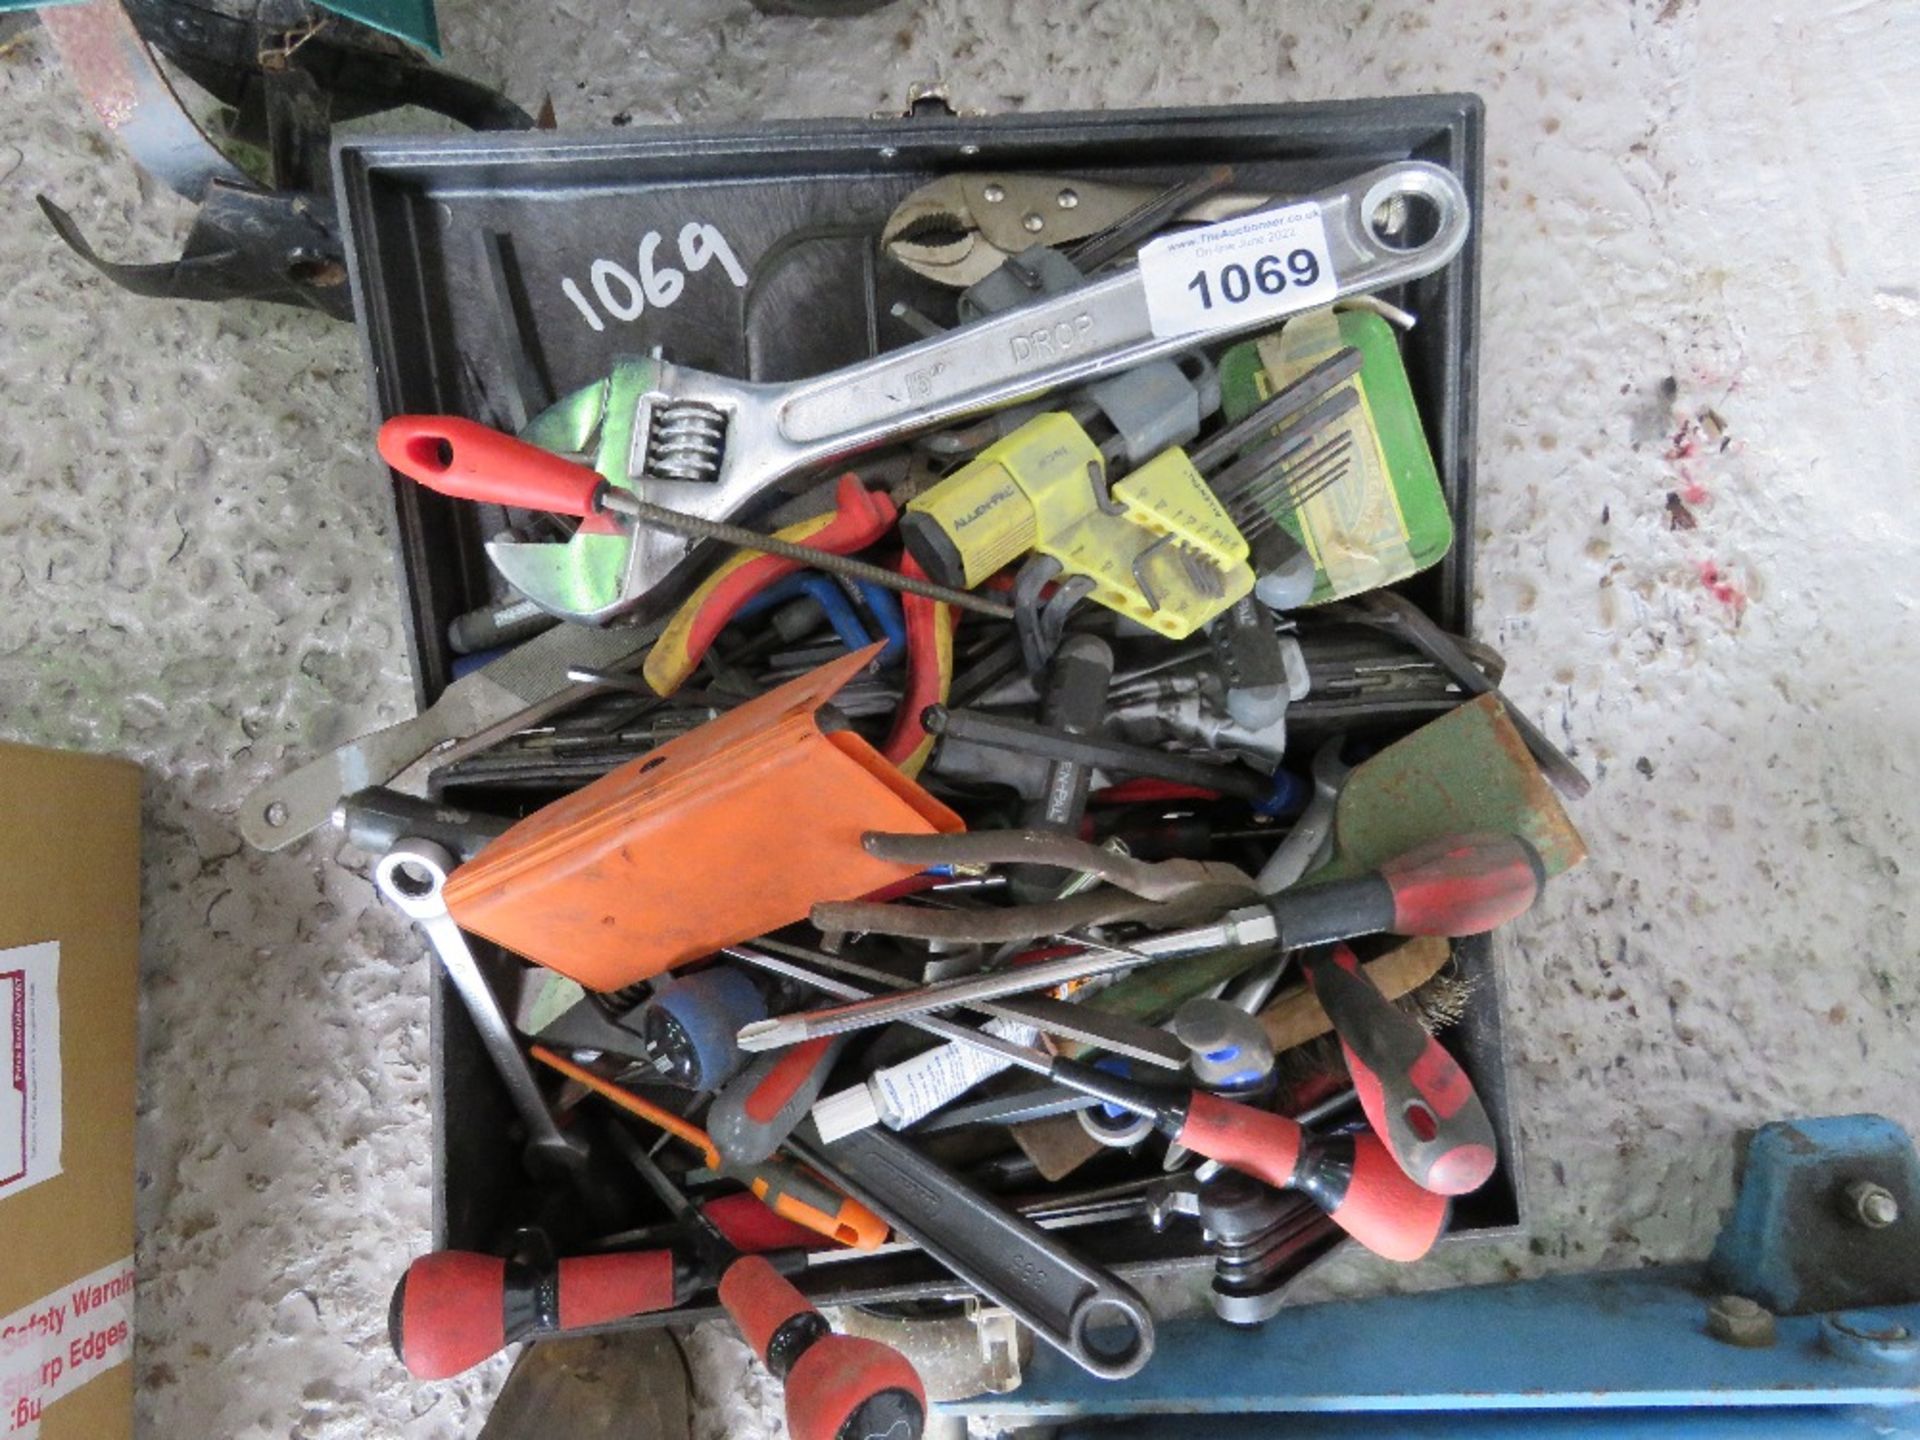 COMPREHENSIVE RANGE OF TOOLS IN A BOX.